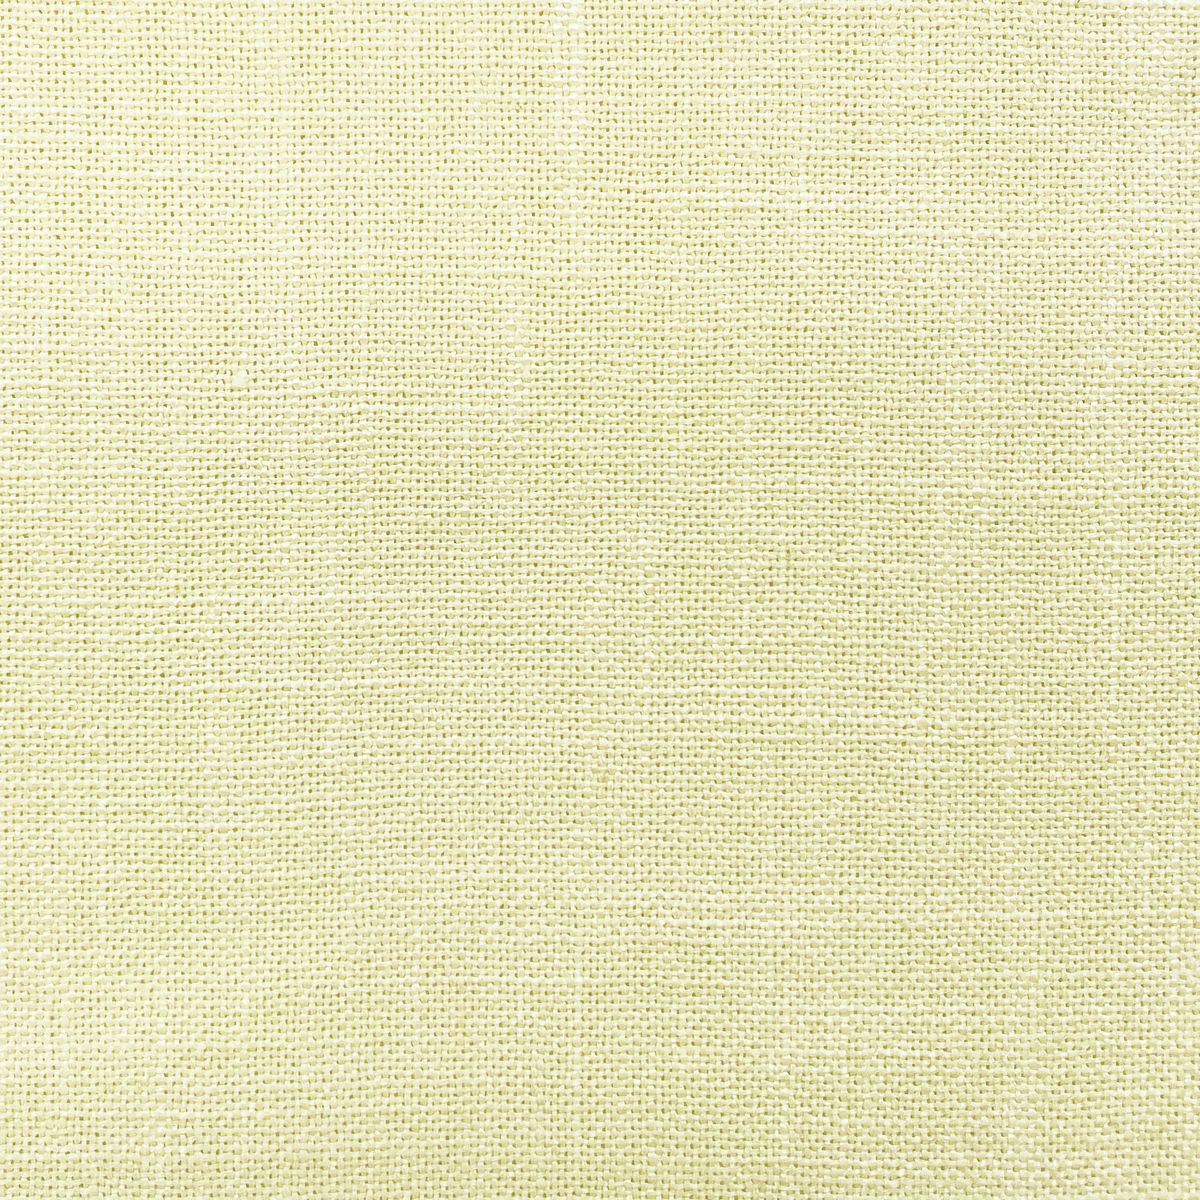 Cotswold Buttermilk Fabric by Chatham Glyn